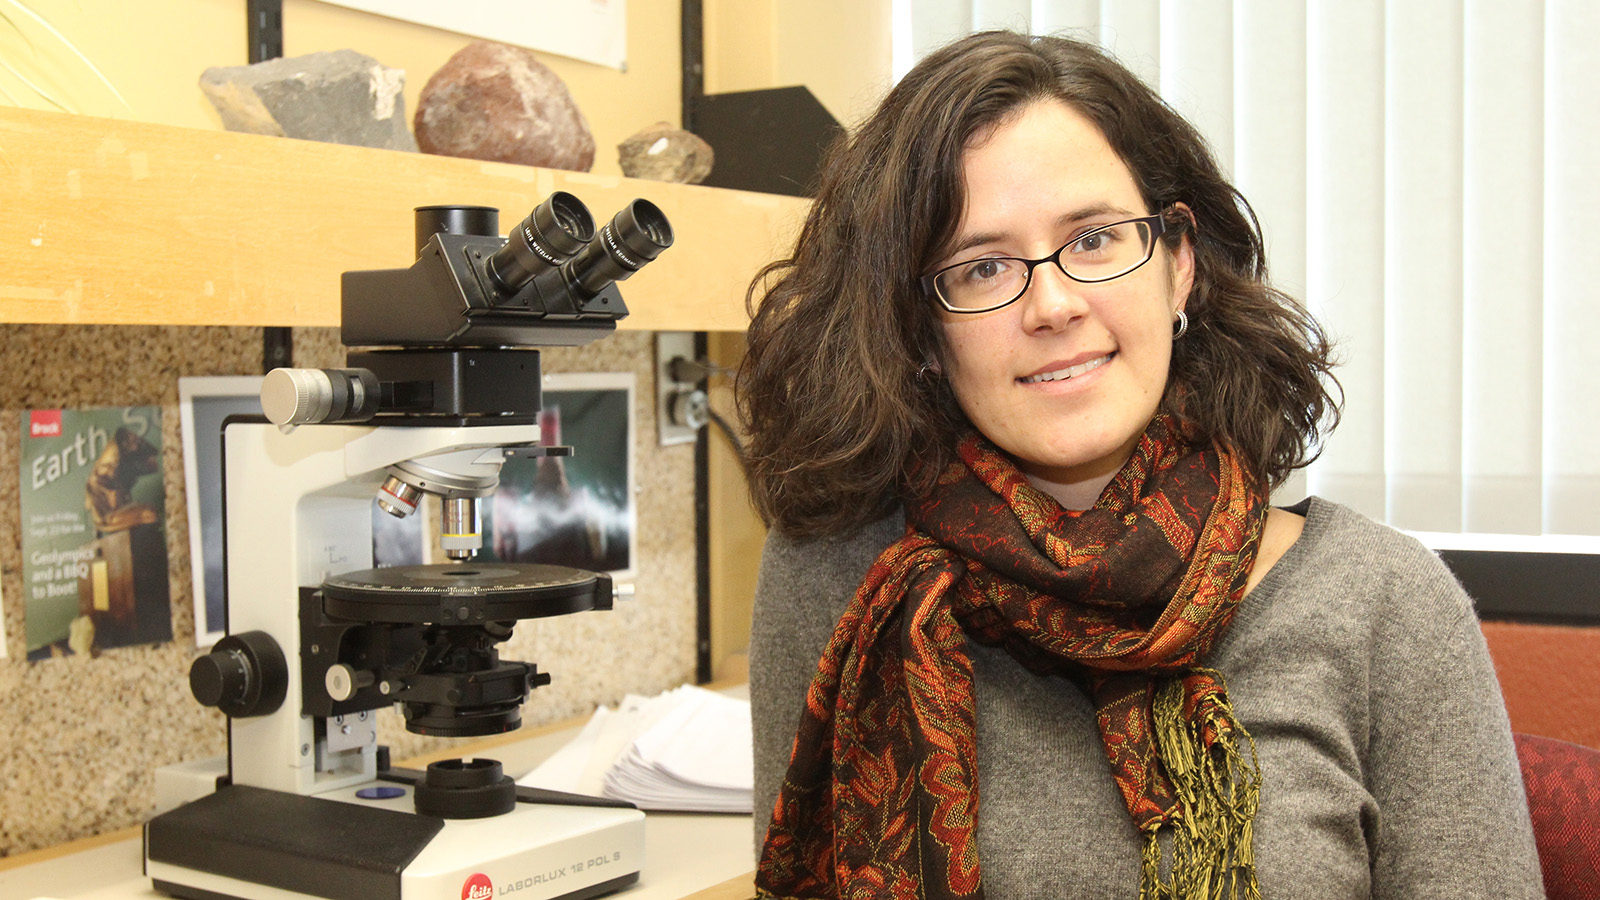 Volcanologist and igneous petrologist Mariek Schmidt and inorganic chemist Theocharis Stamatatos have received funding under the Ministry of Research and Innovation’s Early Researcher Awards program.